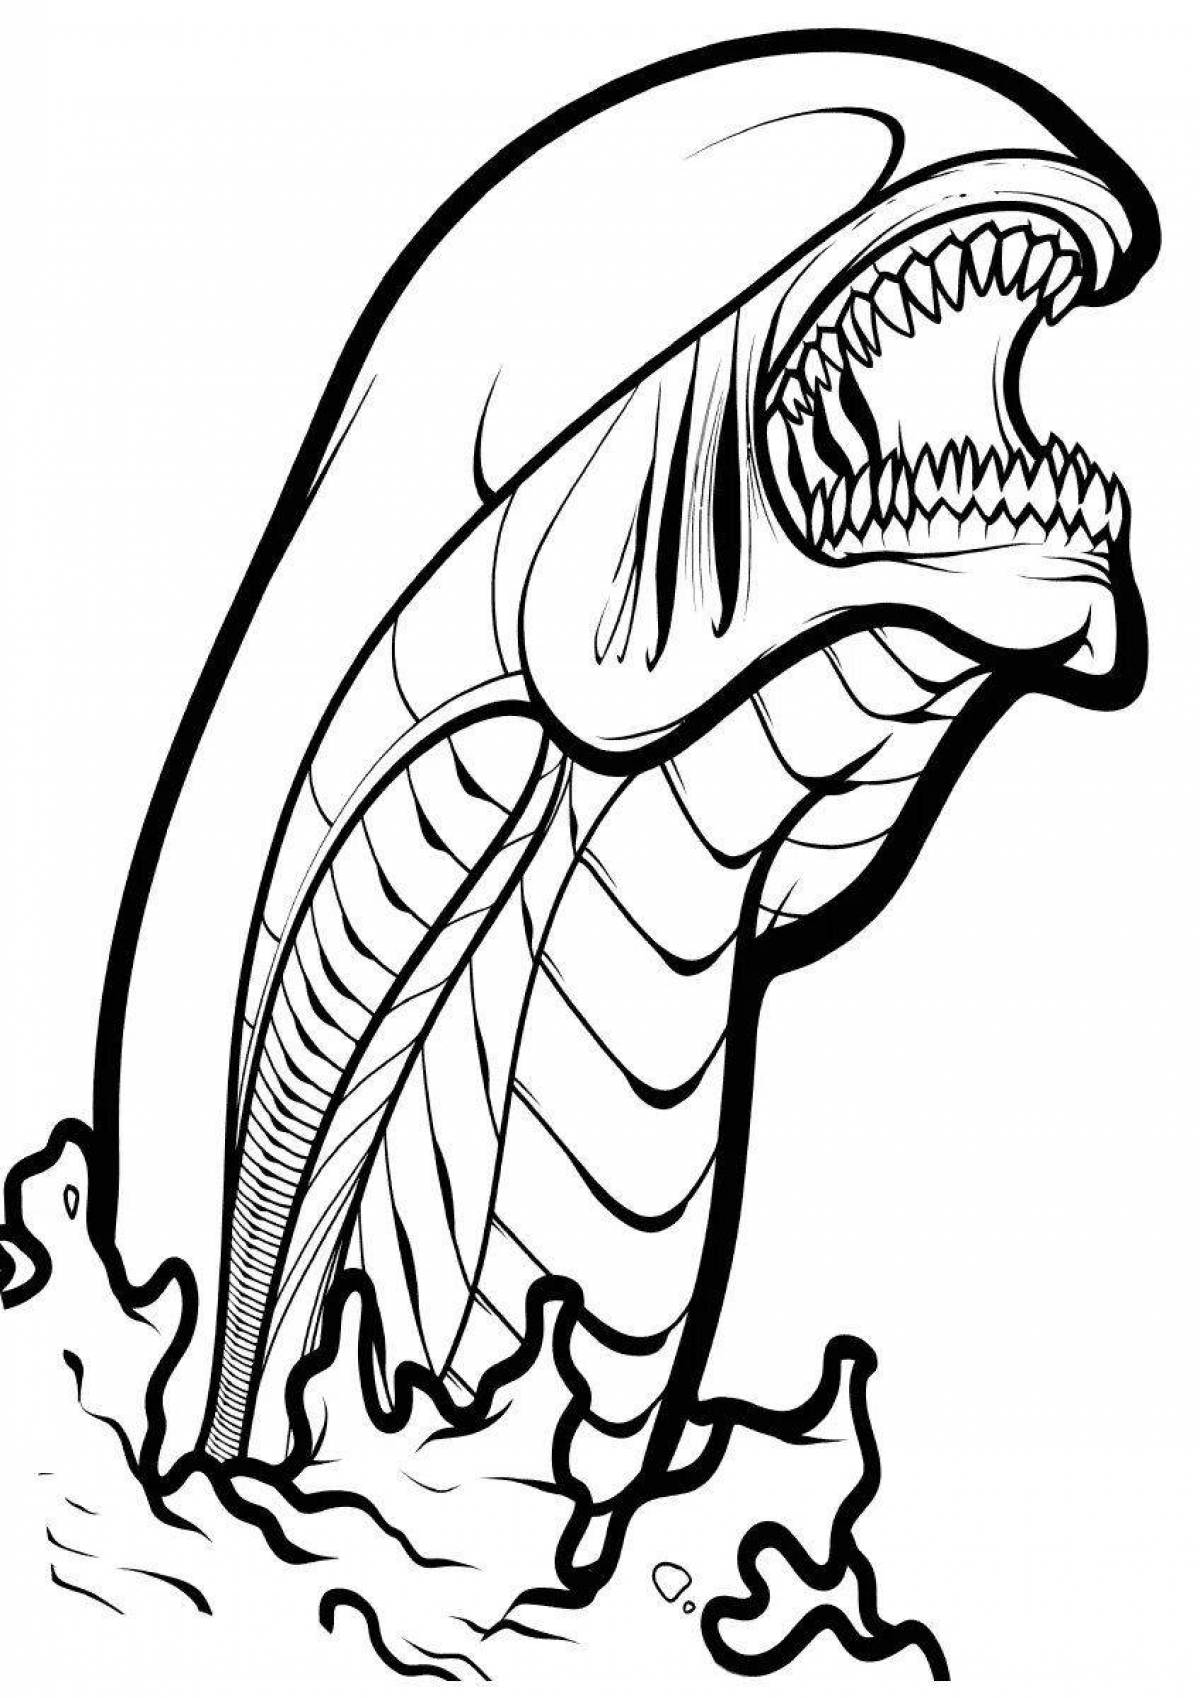 Flawless Sirenhead Coloring Page